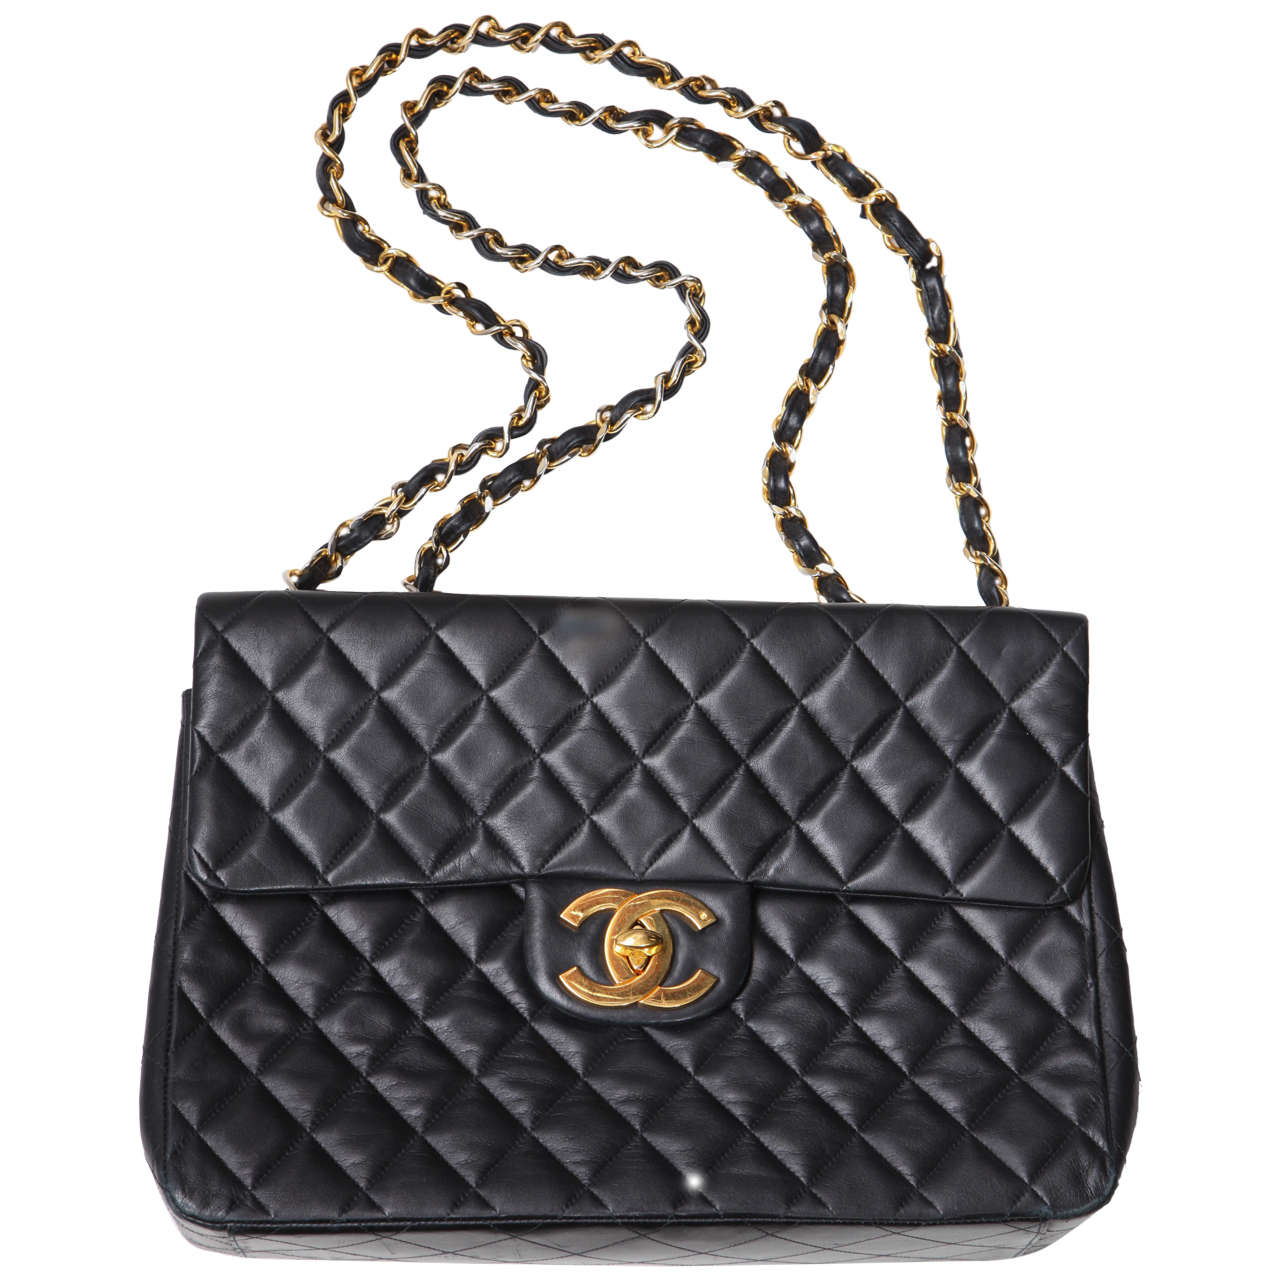 Rare Chanel Quilted Jumbo Flap Bag in Excellent Condition For Sale at ...